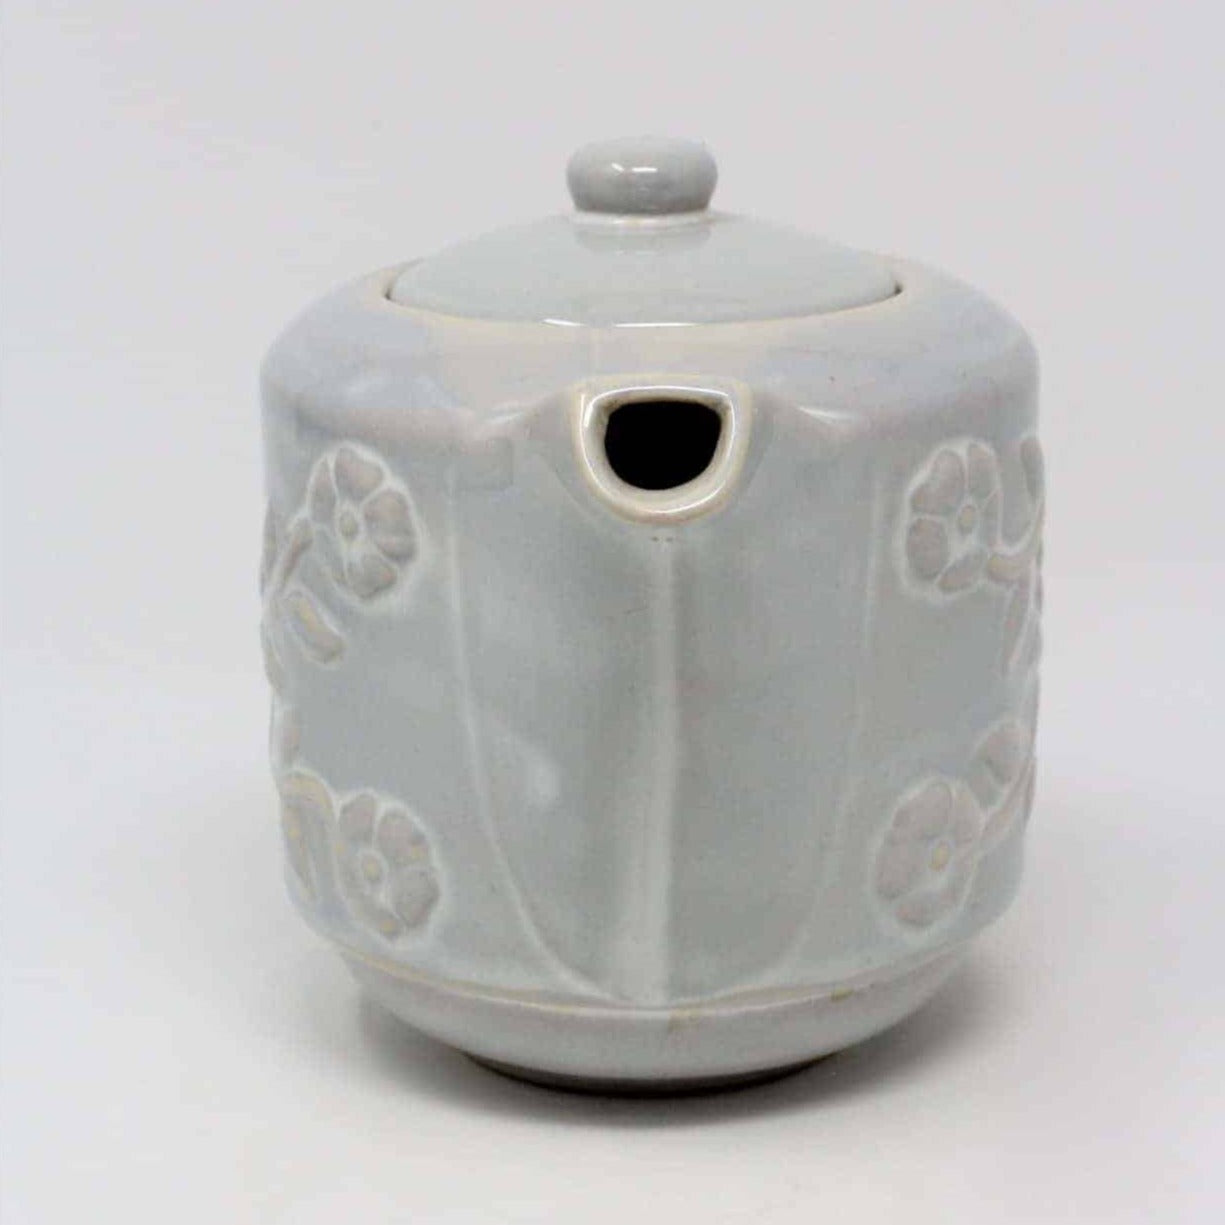 Teapot, Margaux, Floral Embossed, Gray Stoneware, China, Vintage